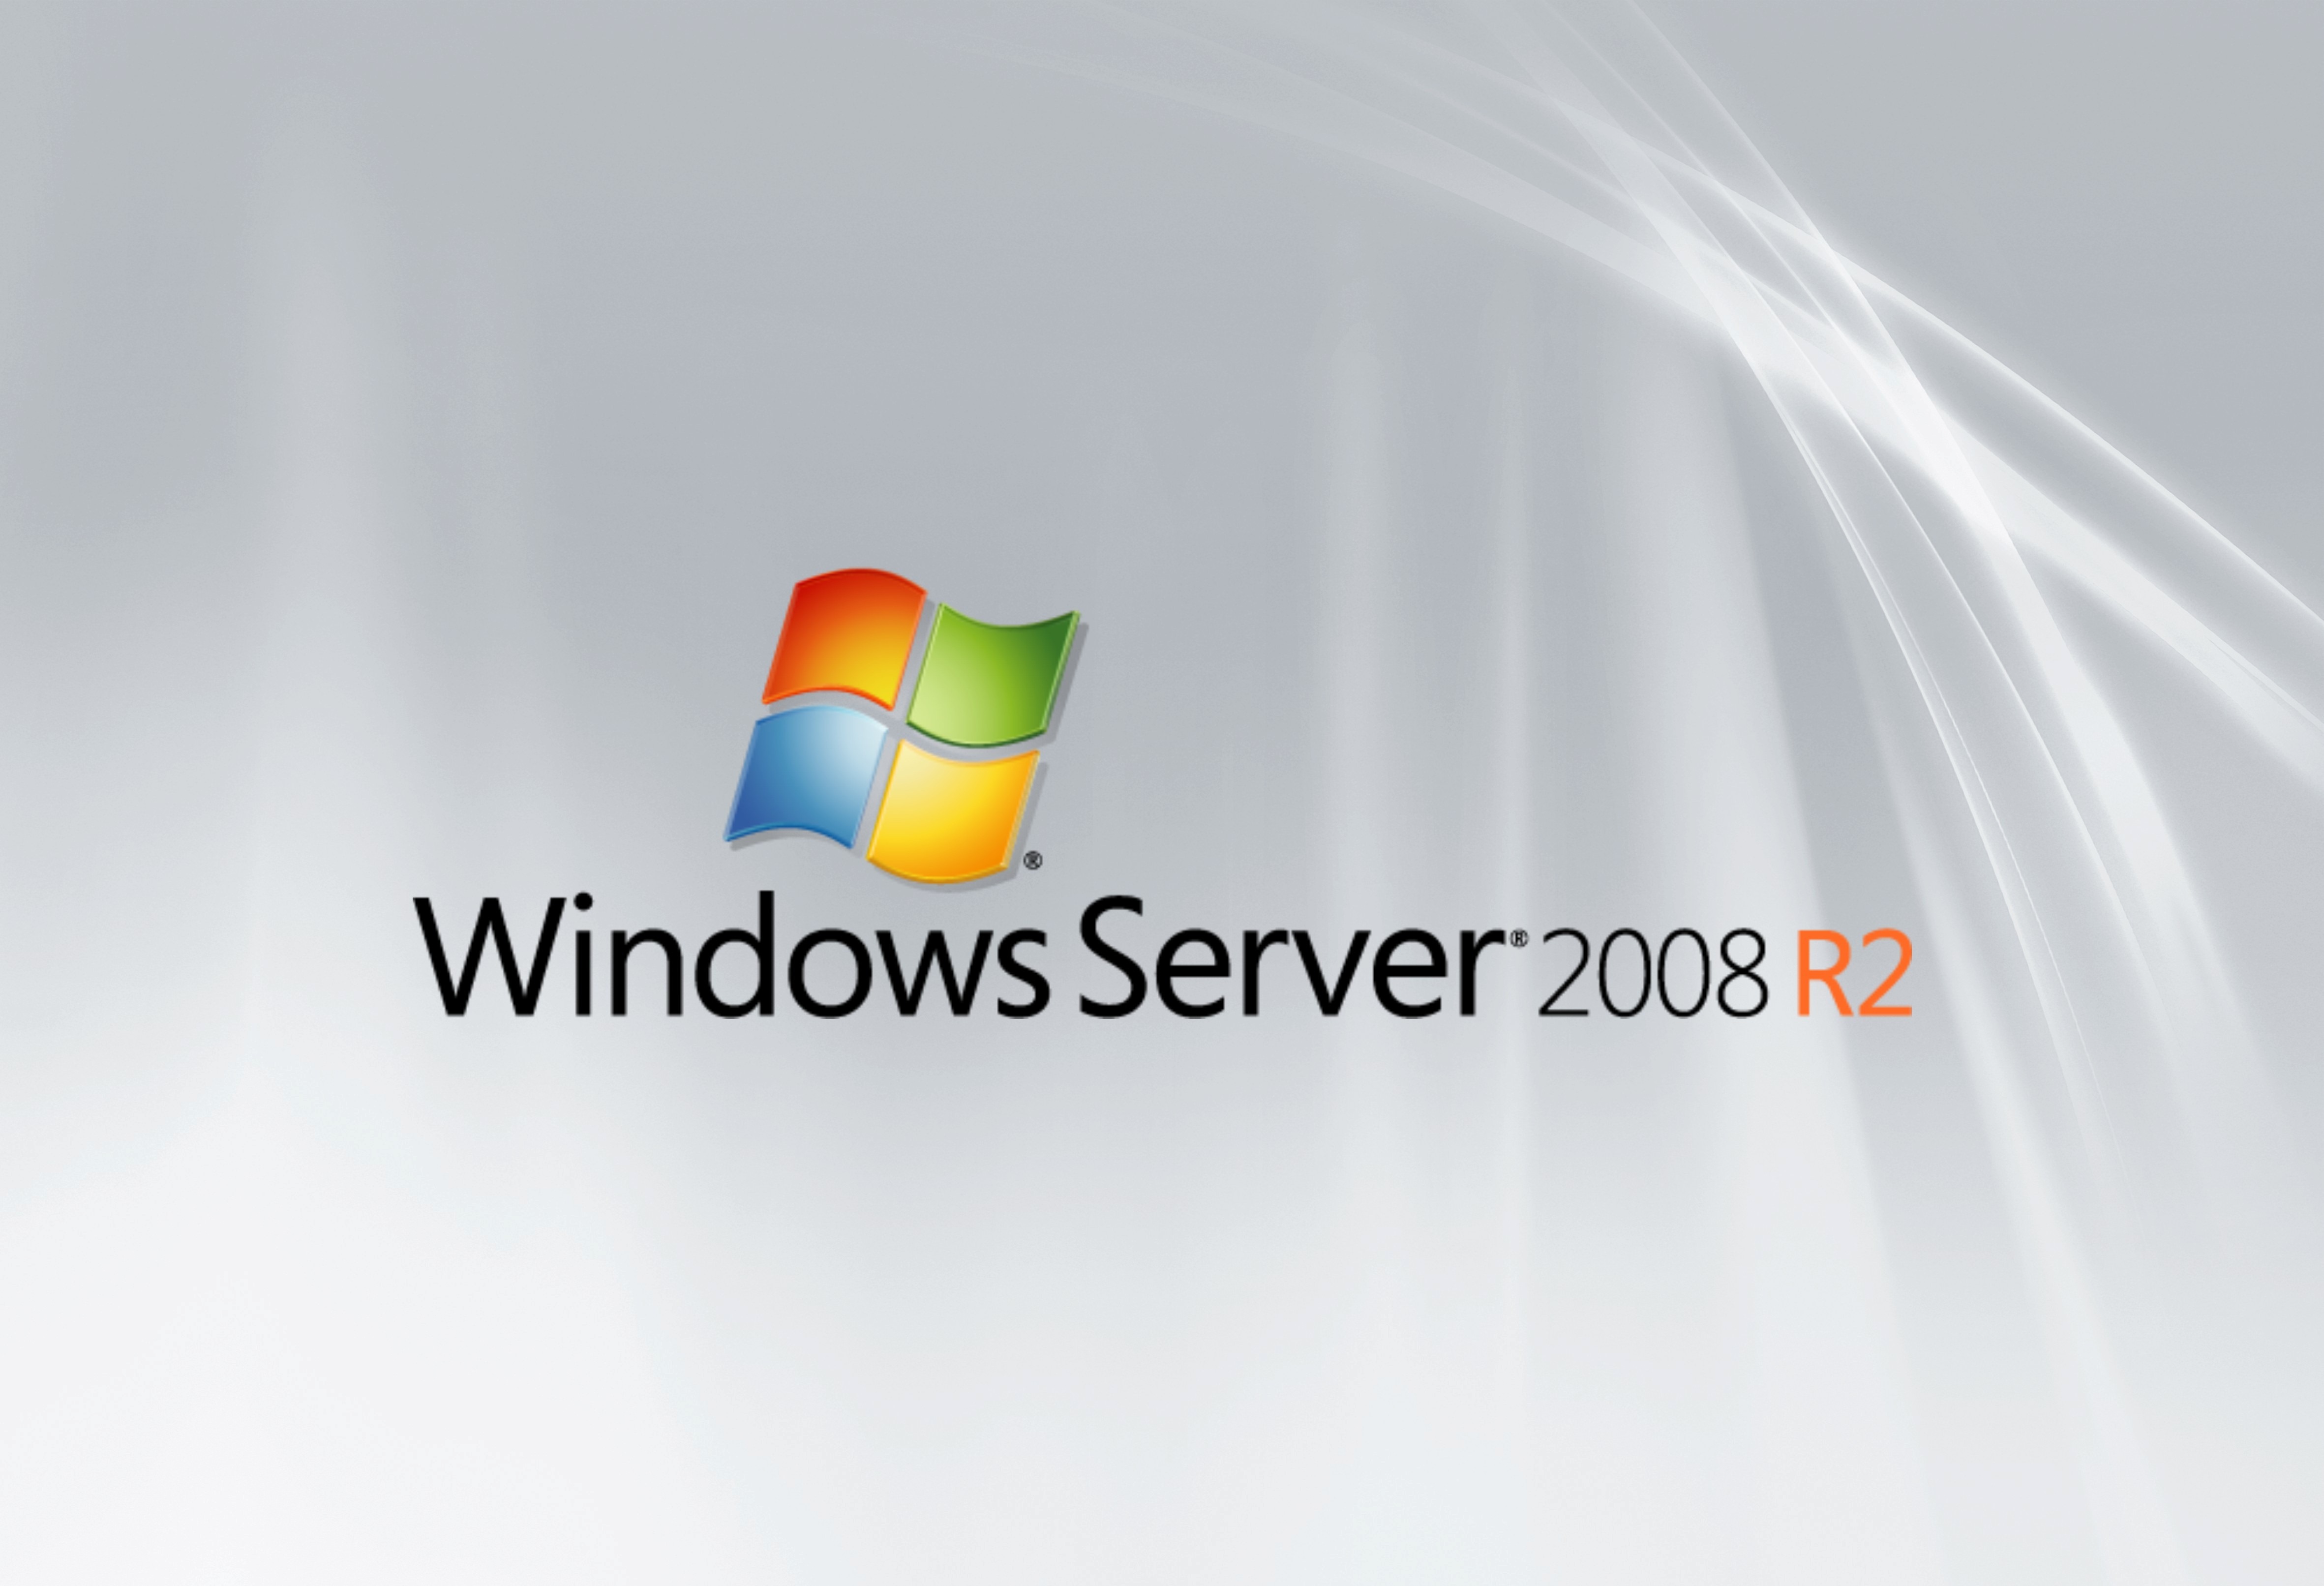 High Quality Windows Server Wallpaper | Full HD Pictures